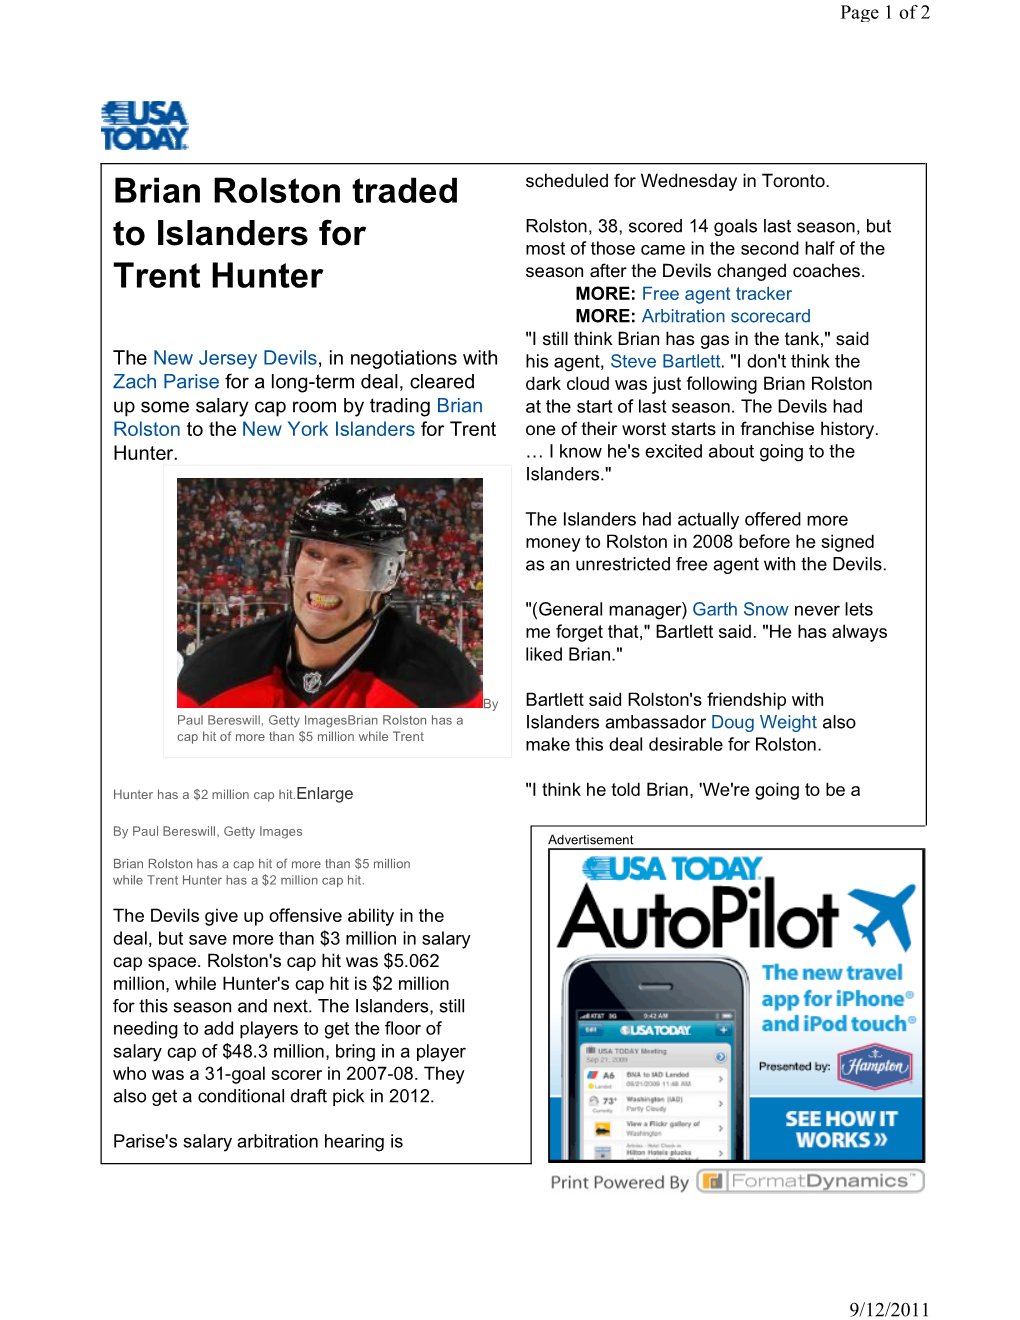 Brian Rolston Traded to Islanders for Trent Hunter